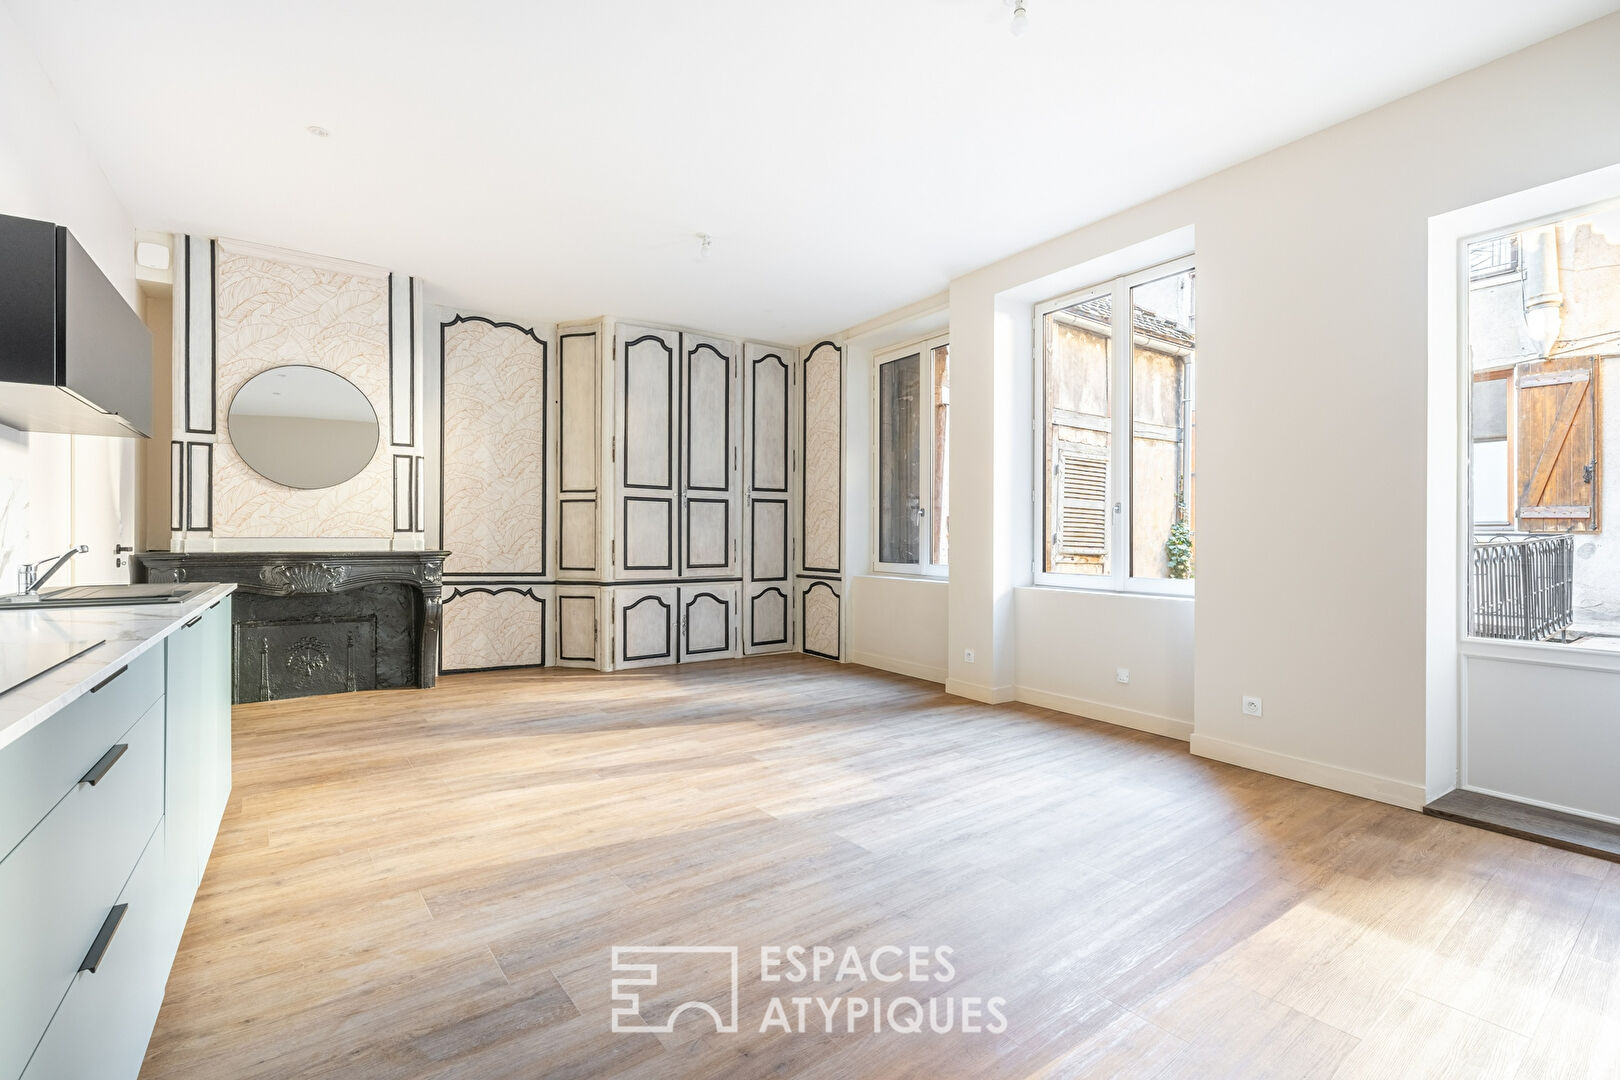 Charming renovated apartment in the heart of Villefranche city center